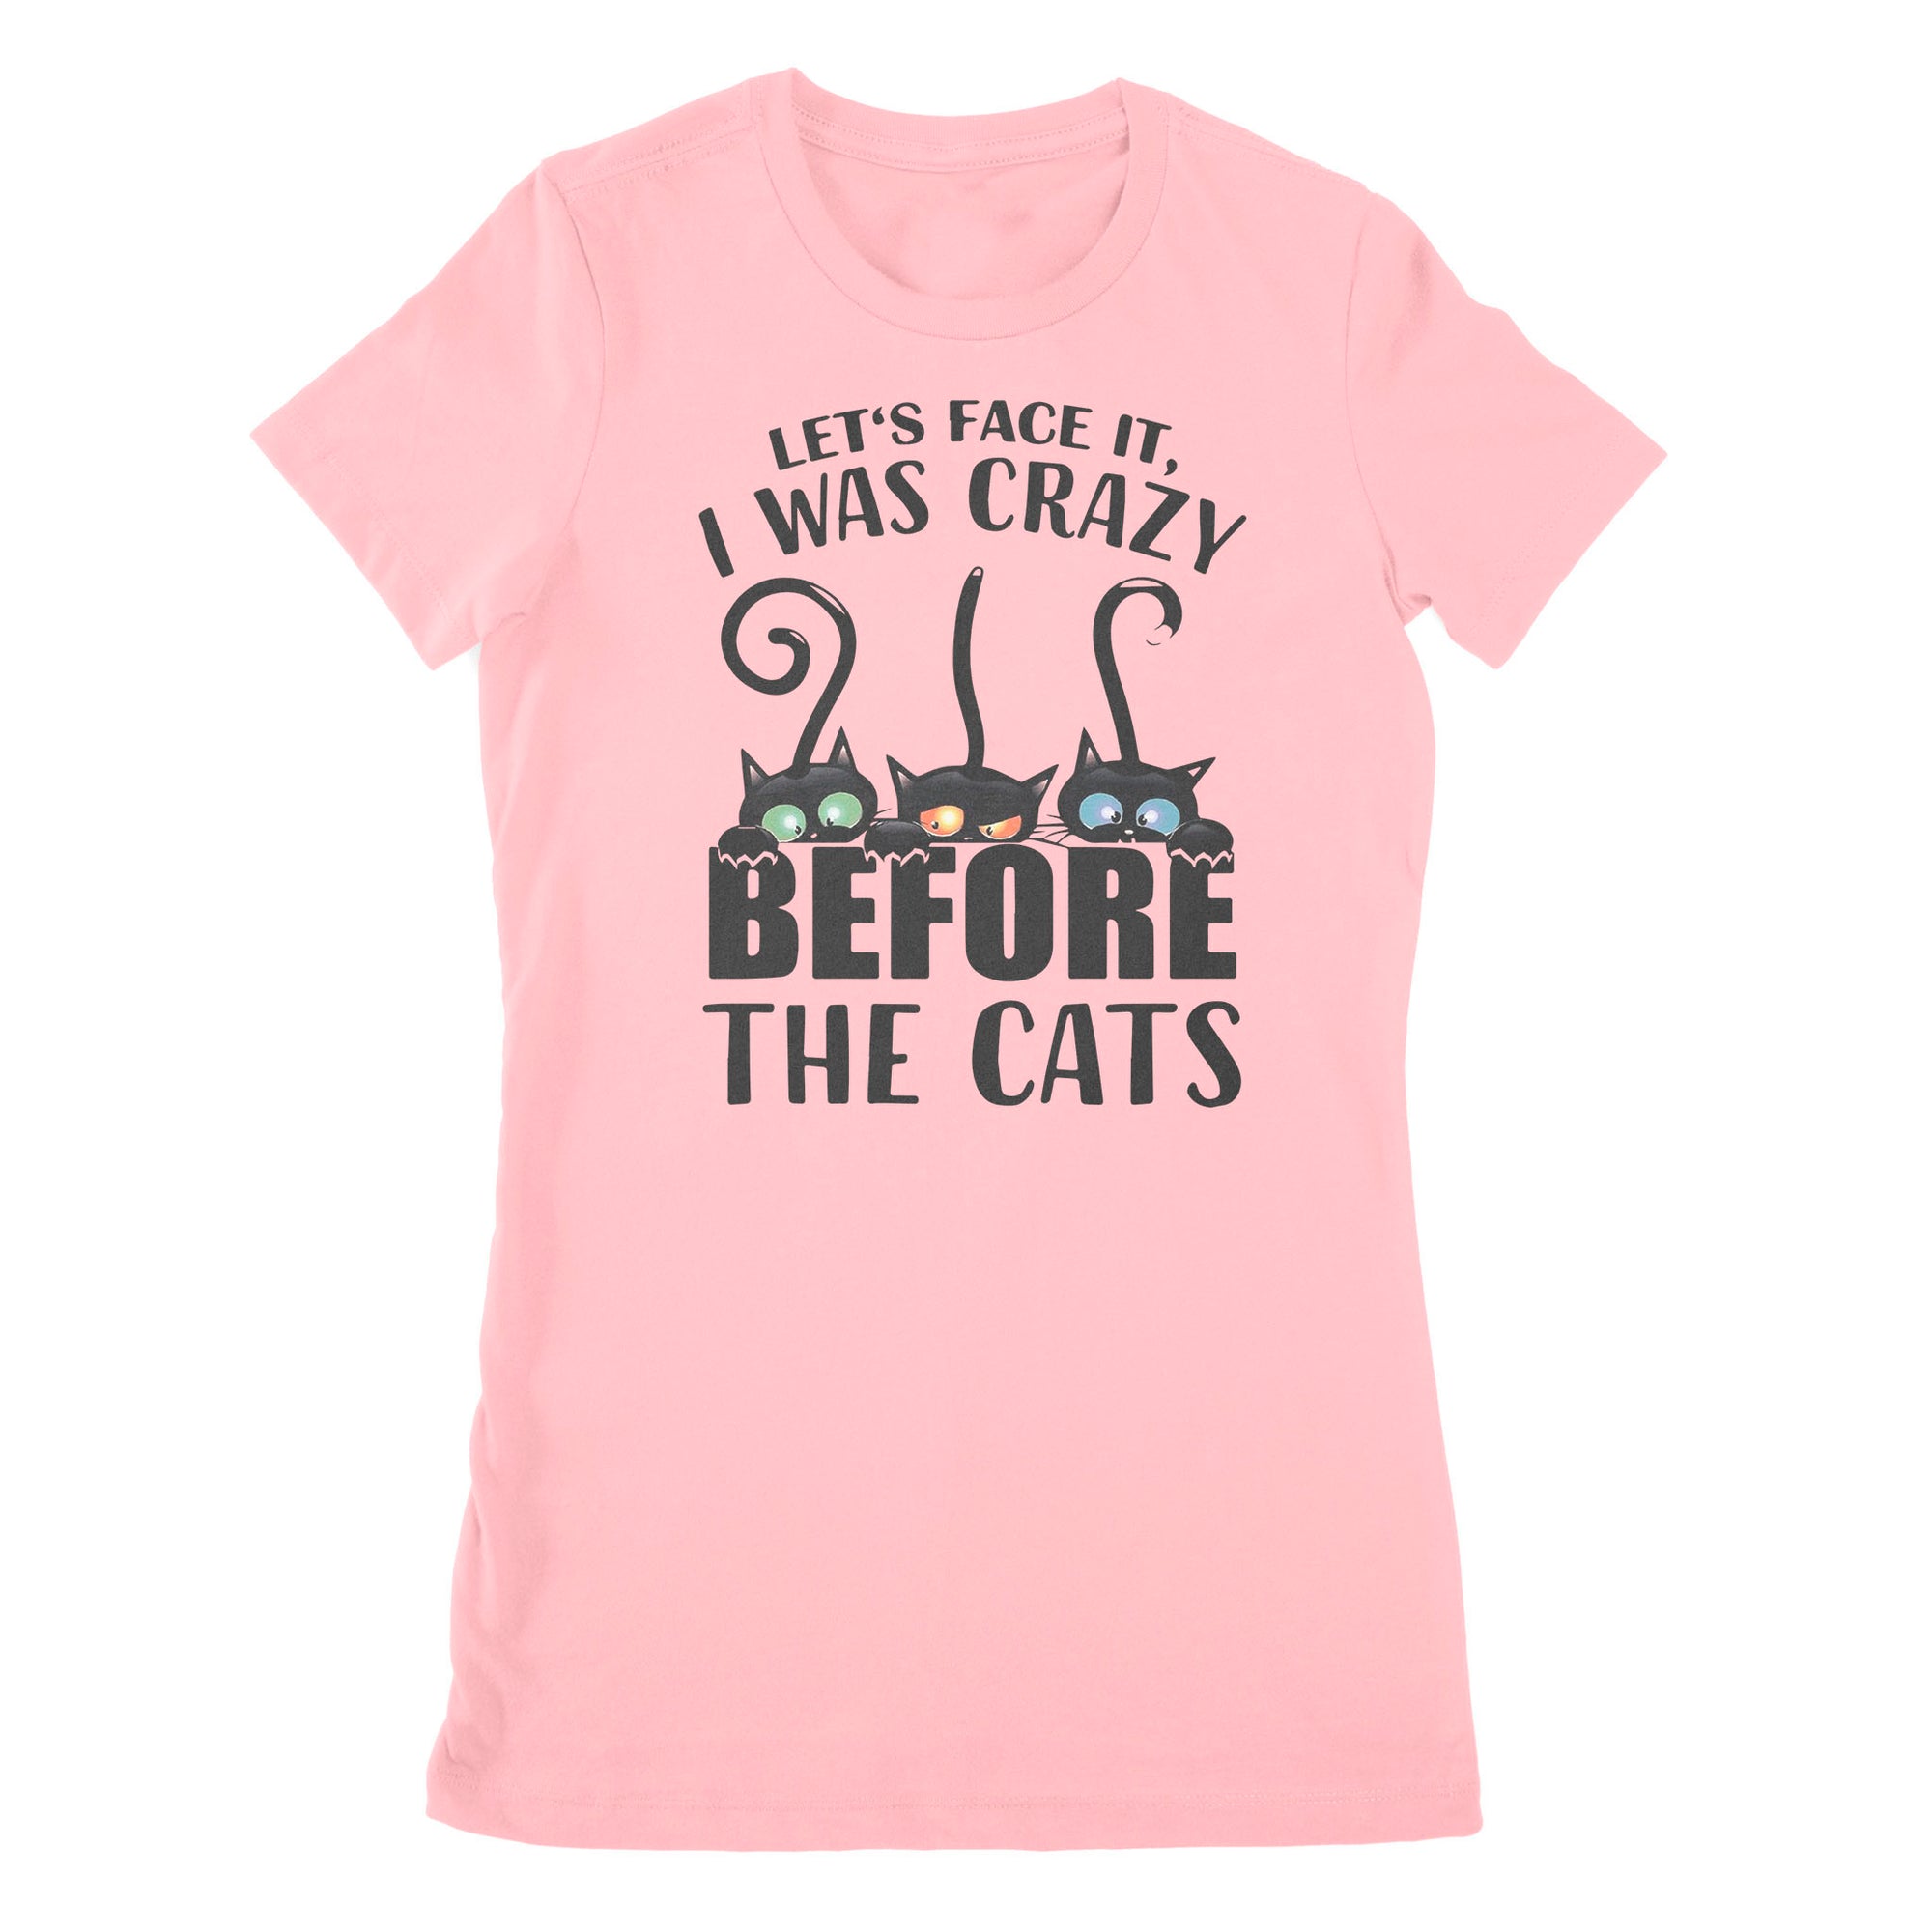 Let's Face It I Was Crazy Before The Cats - Premium Women's T-shirt